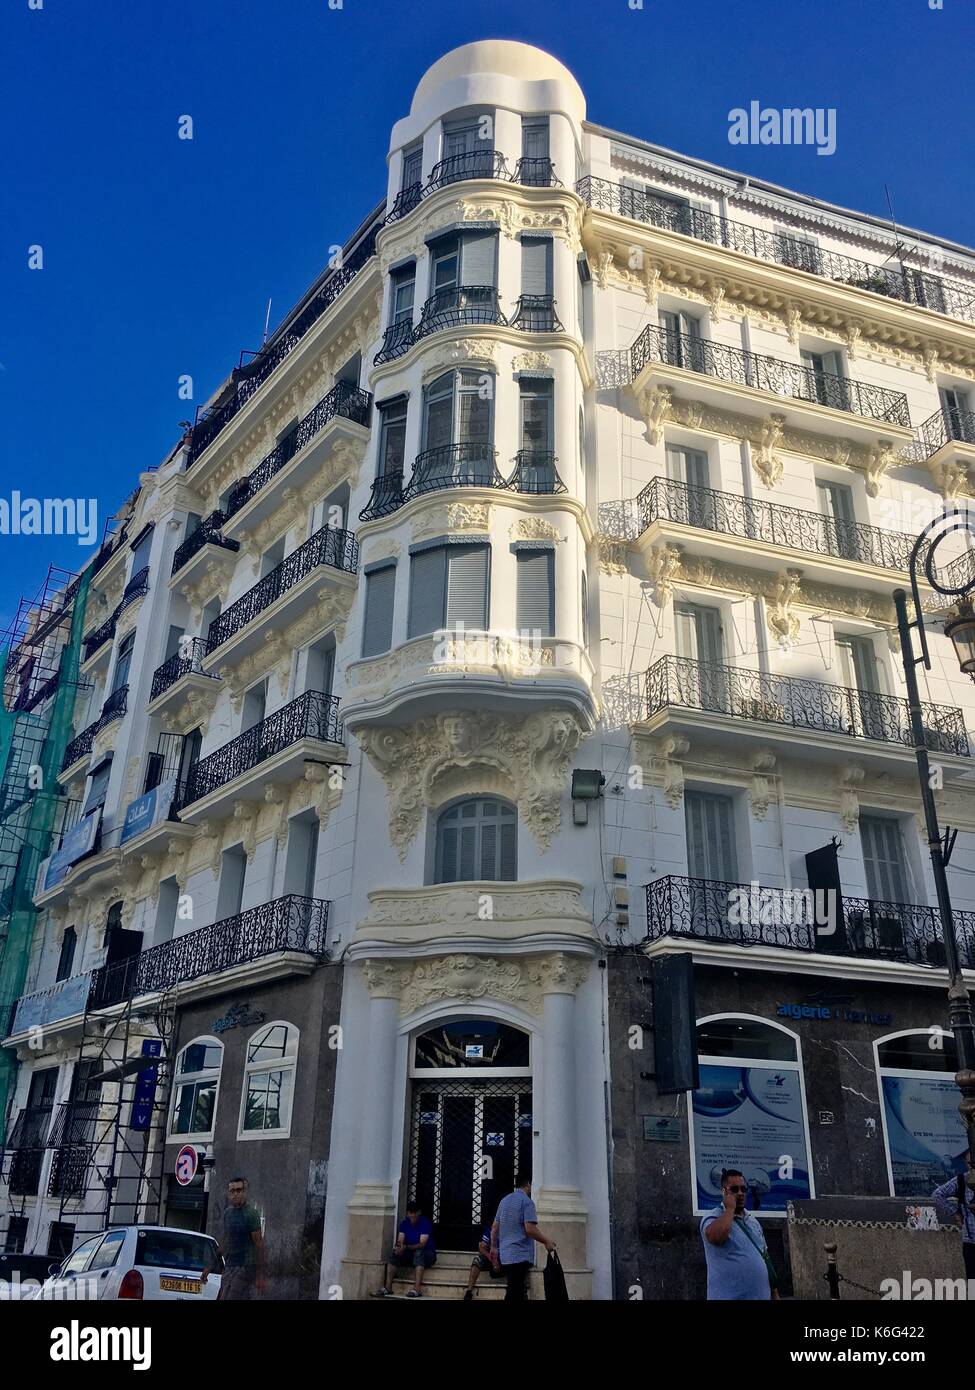 ALGIERS, ALGERIA - SEPTEMBER 15, 2017: French colonial side of the city of Algiers Algeria.Modern city has many old French type buildings. Stock Photo